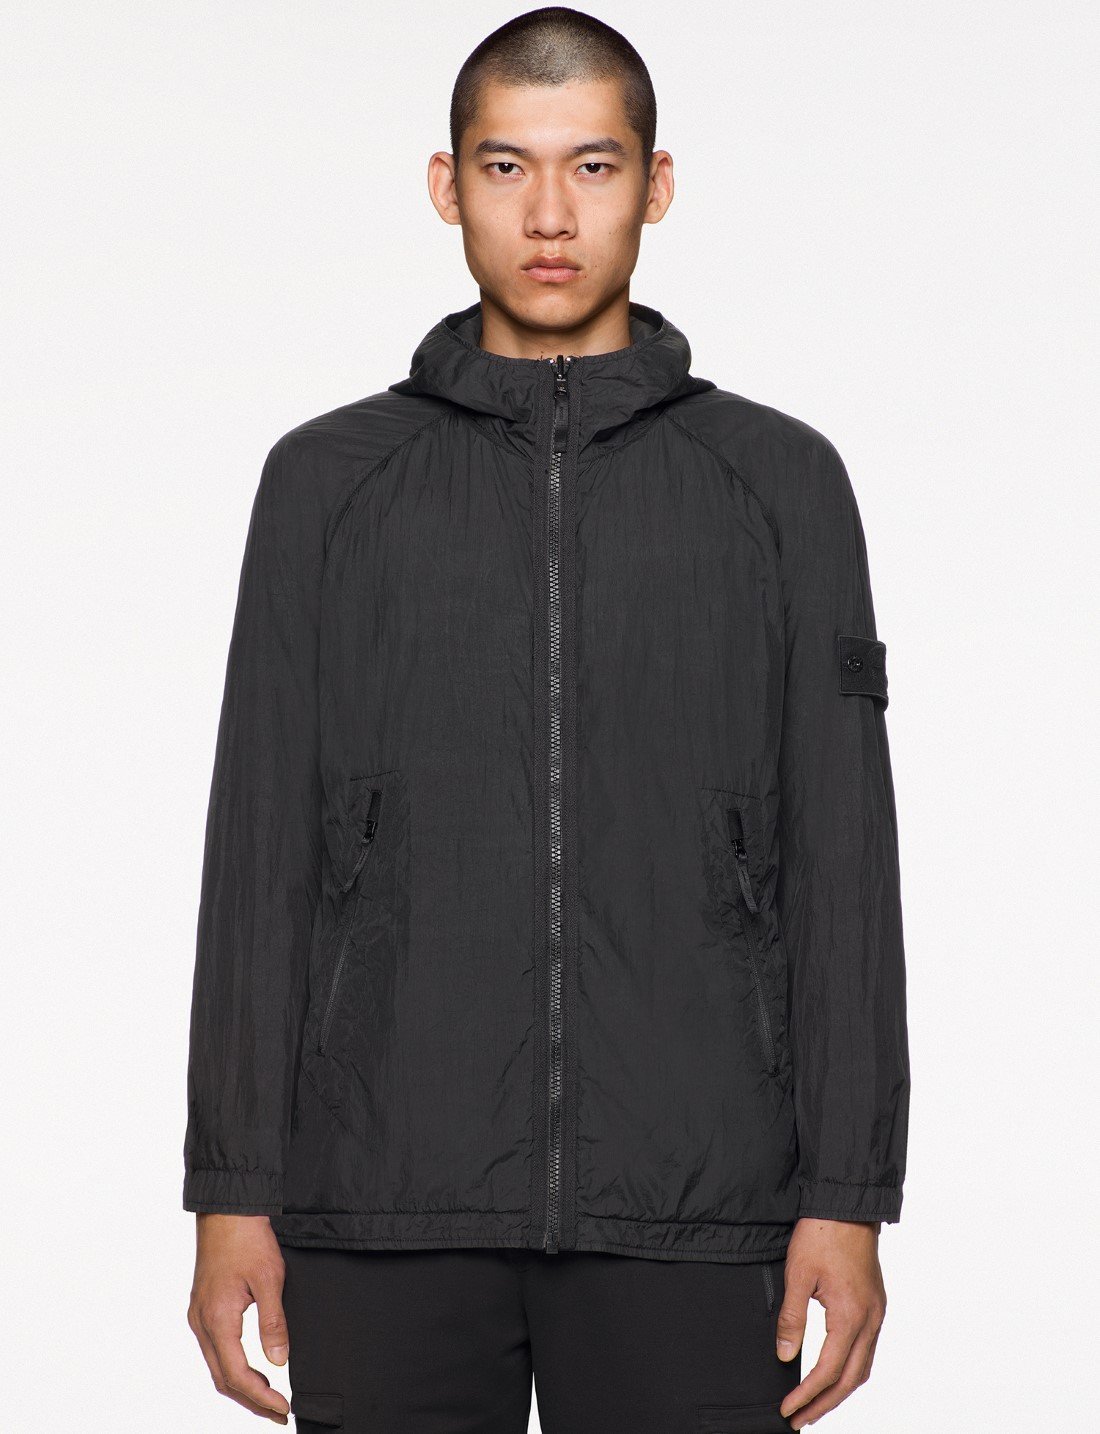 Stone Island - Collection capsule Ghost Pieces